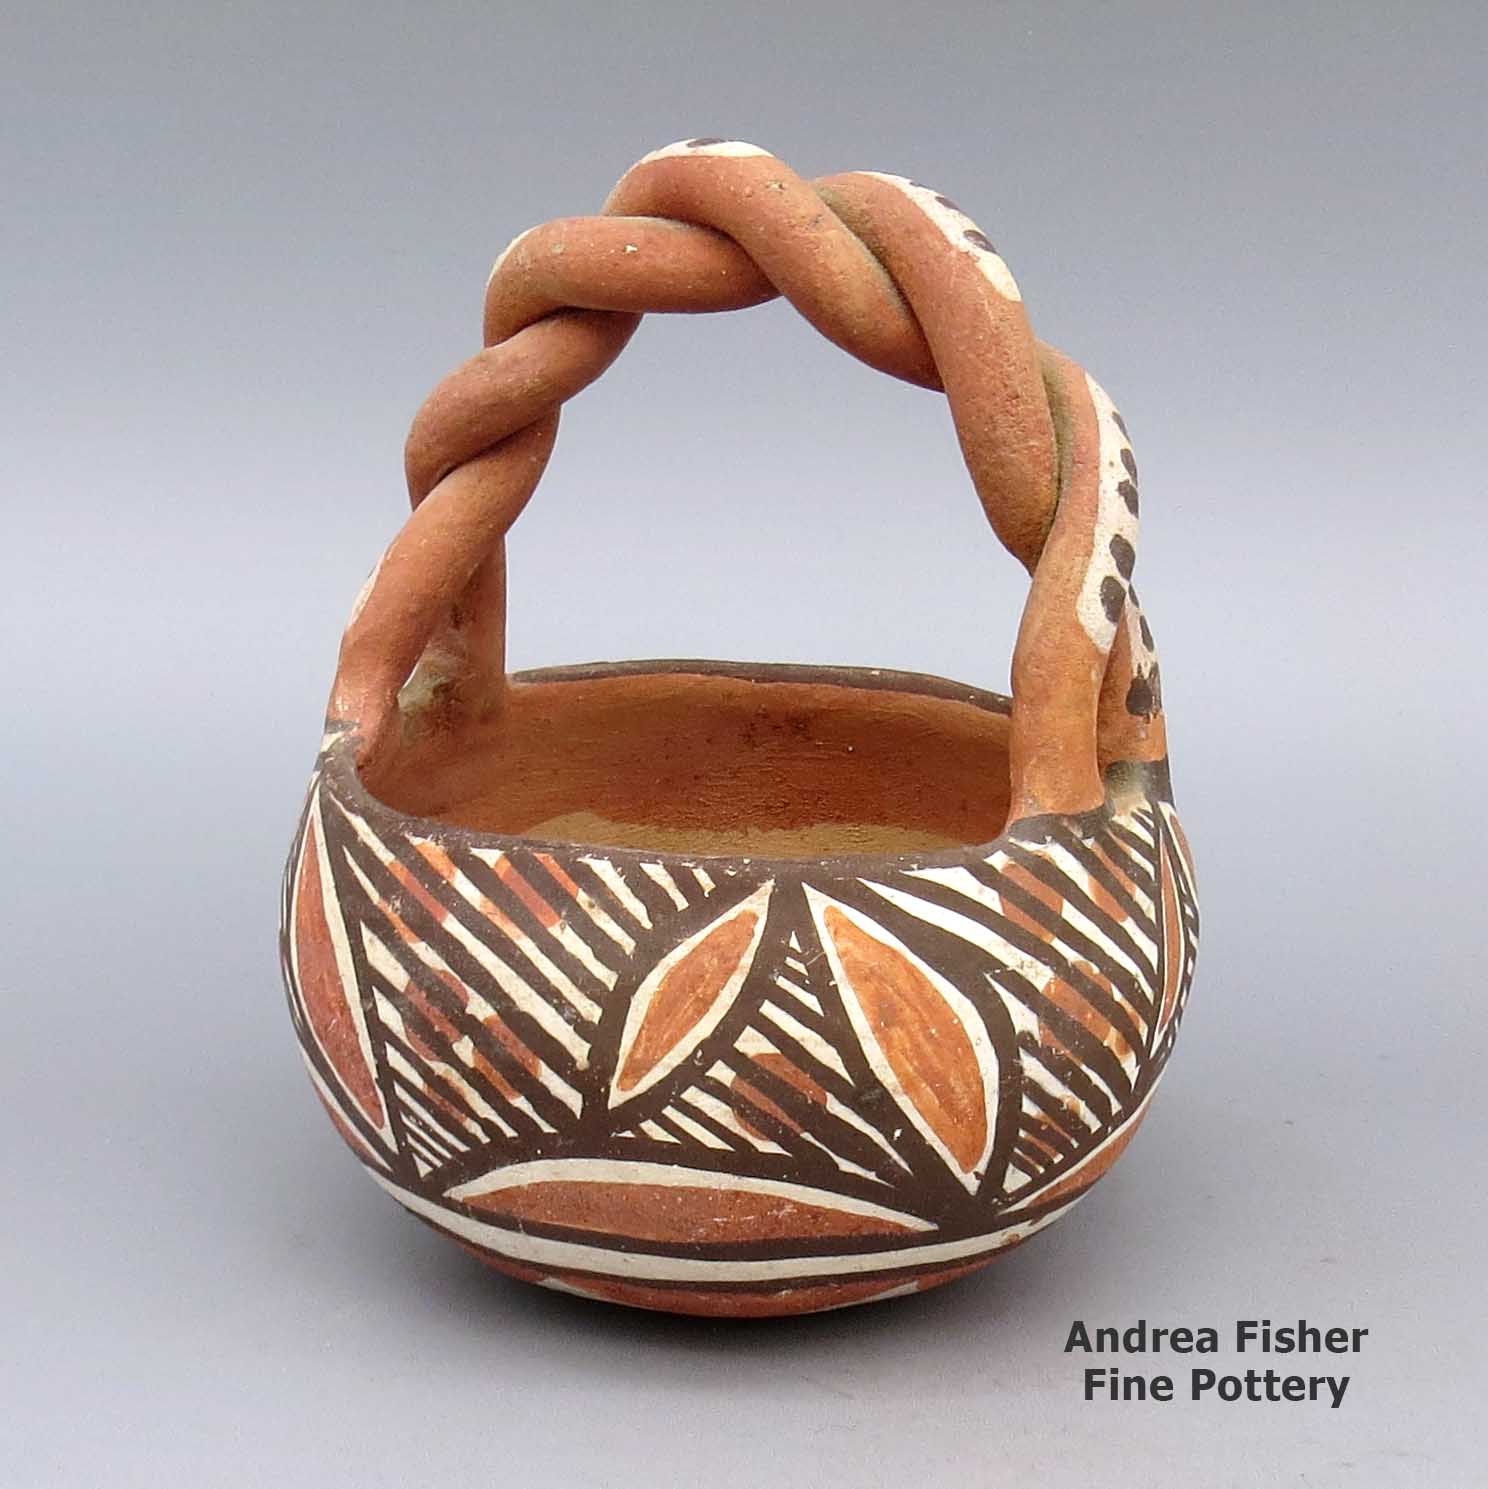 Polychrome friendship basket with twisted handle and geometric design made by Unknown of Isleta